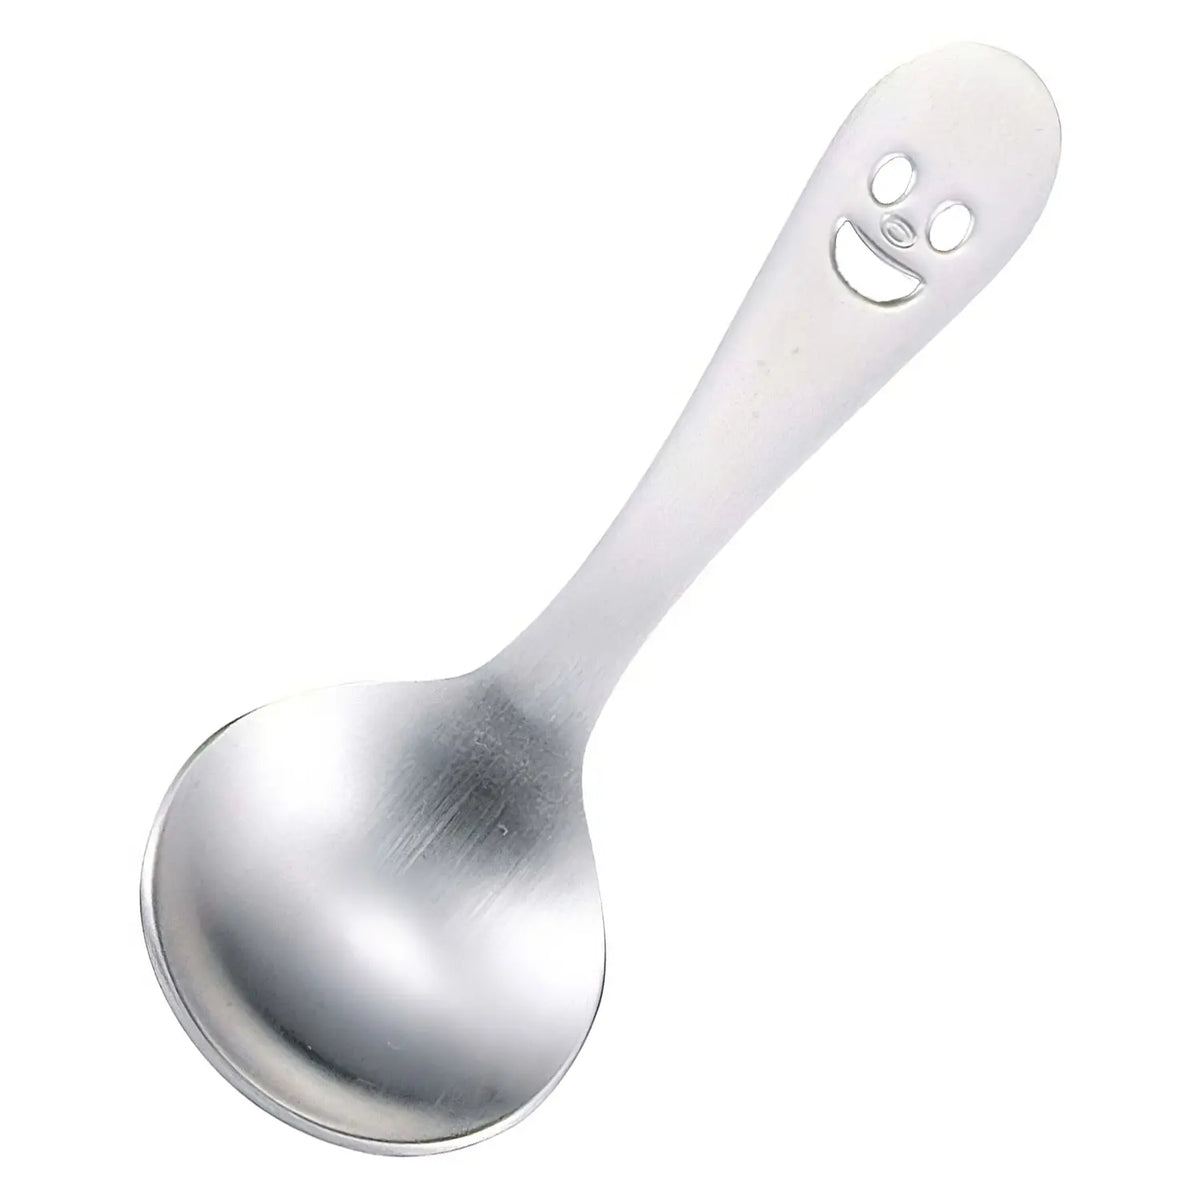 Wada NICO Stainless Steel Petit Candy Spoon 9.8cm